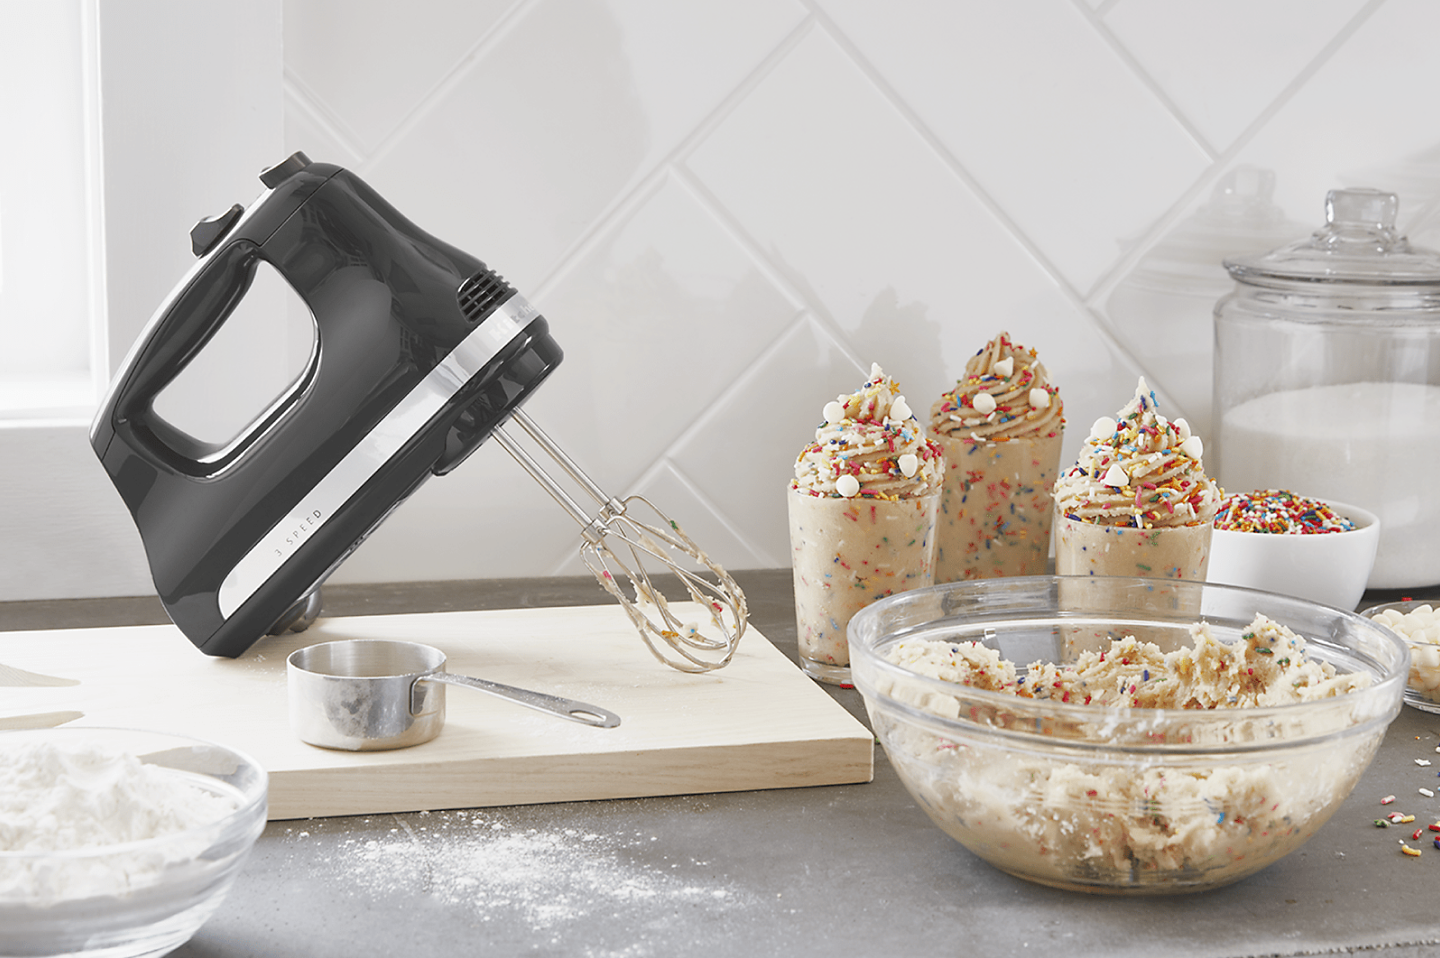 Black KitchenAid® hand mixer on wooden cutting board next to whipped cream with sprinkles in serving cups